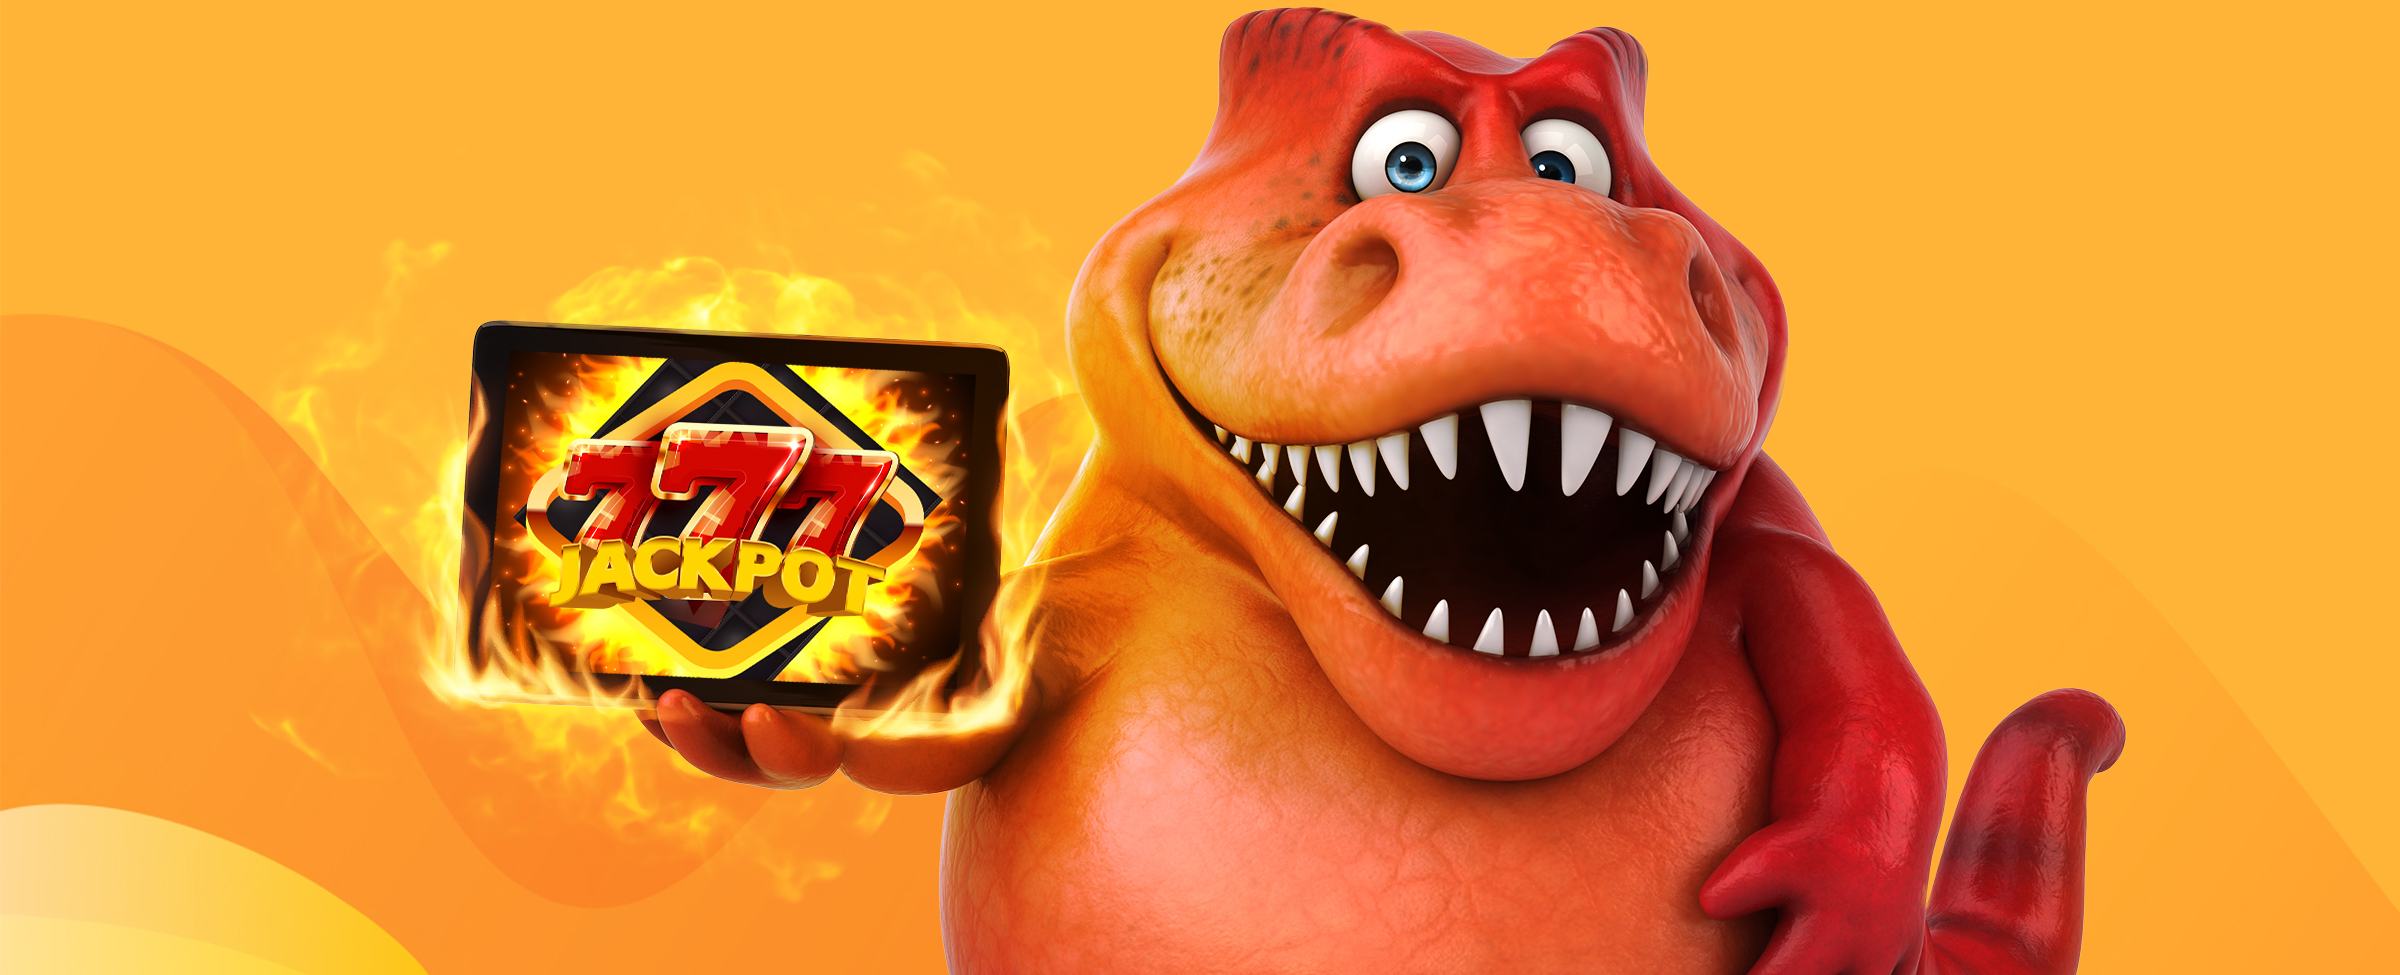 Featured in the middle of the image is a 3D-animated cartoon-style orange dinosaur wearing an energetic expression. The dinosaur holds up an iPad in one hand, showing a SlotsLV slots game with a fiery background overlaid with three number sevens in red, with the word Jackpot on top. Surrounding the iPad is a ball of fire, while behind, we see an orange multi-toned abstract background.